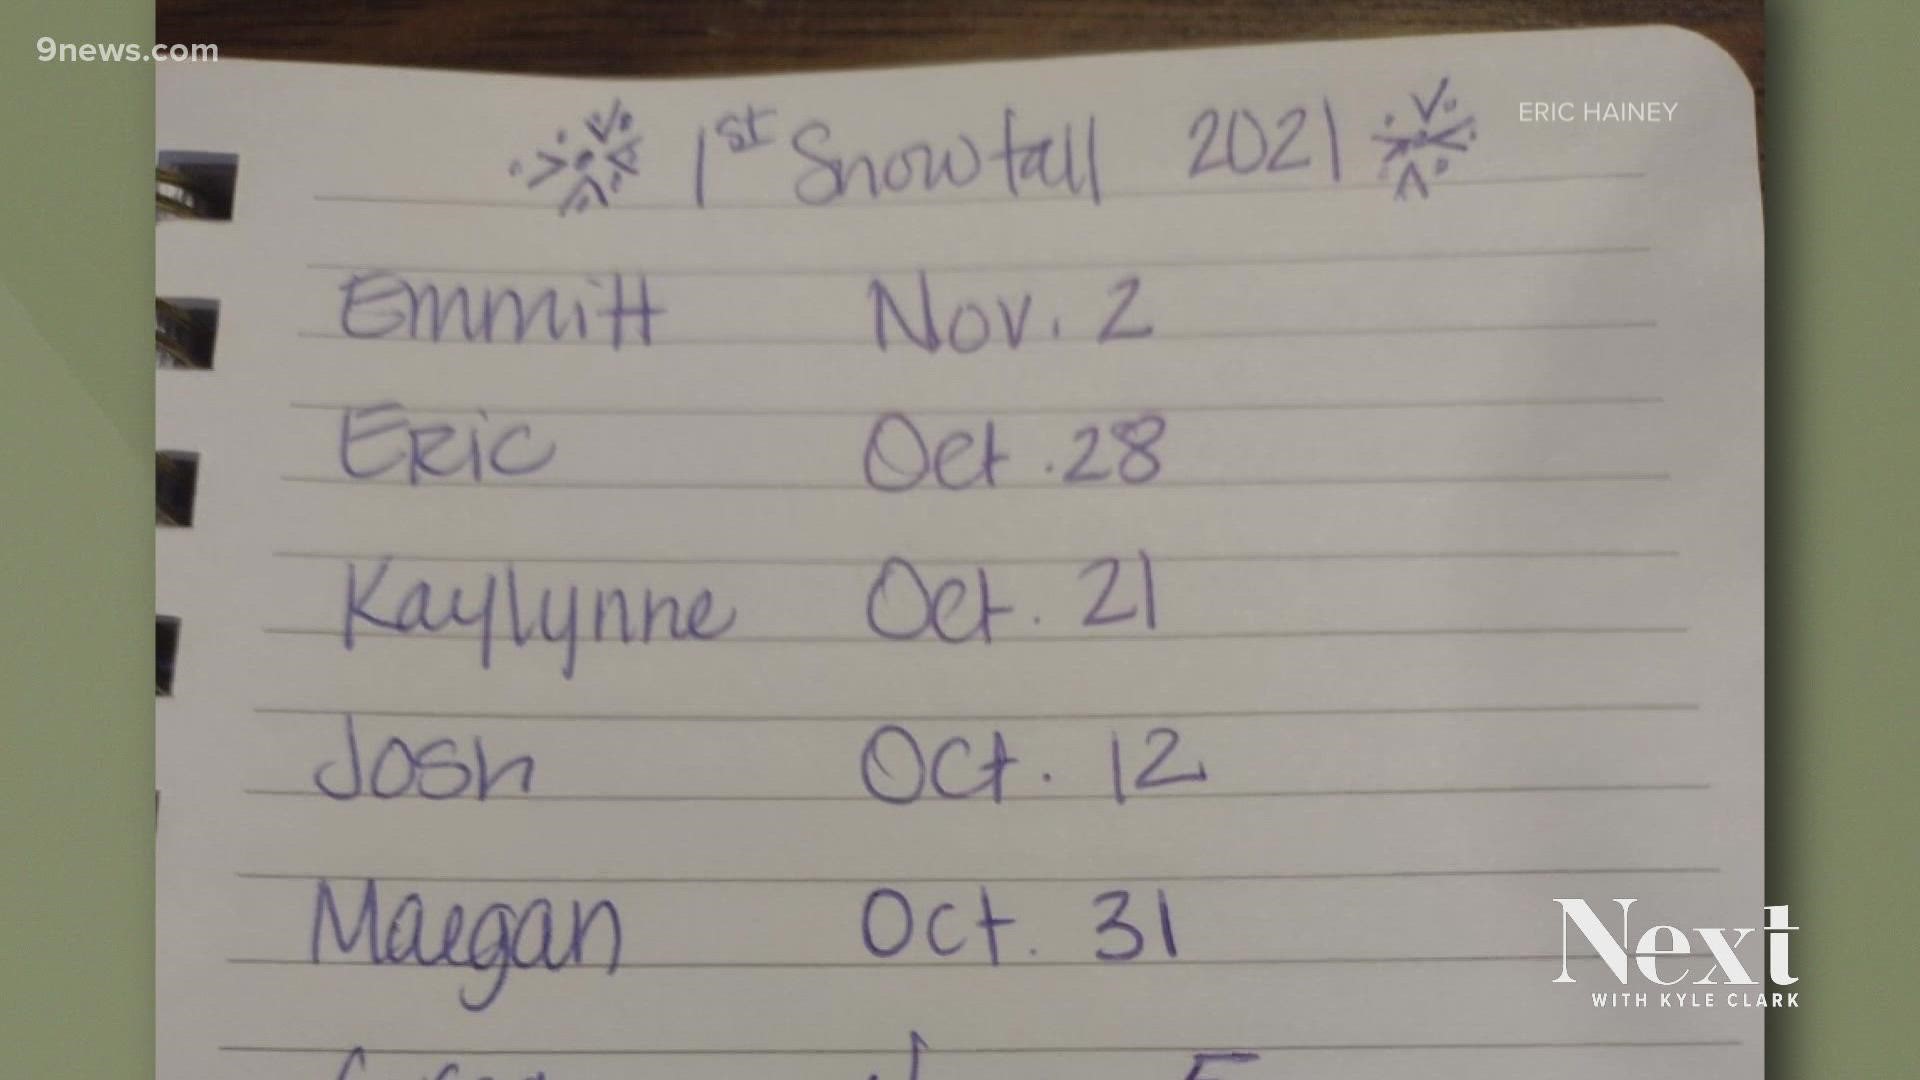 The most Colorado thing we saw today is the Hainey family's annual summer tradition of calling the date of the first snowfall.